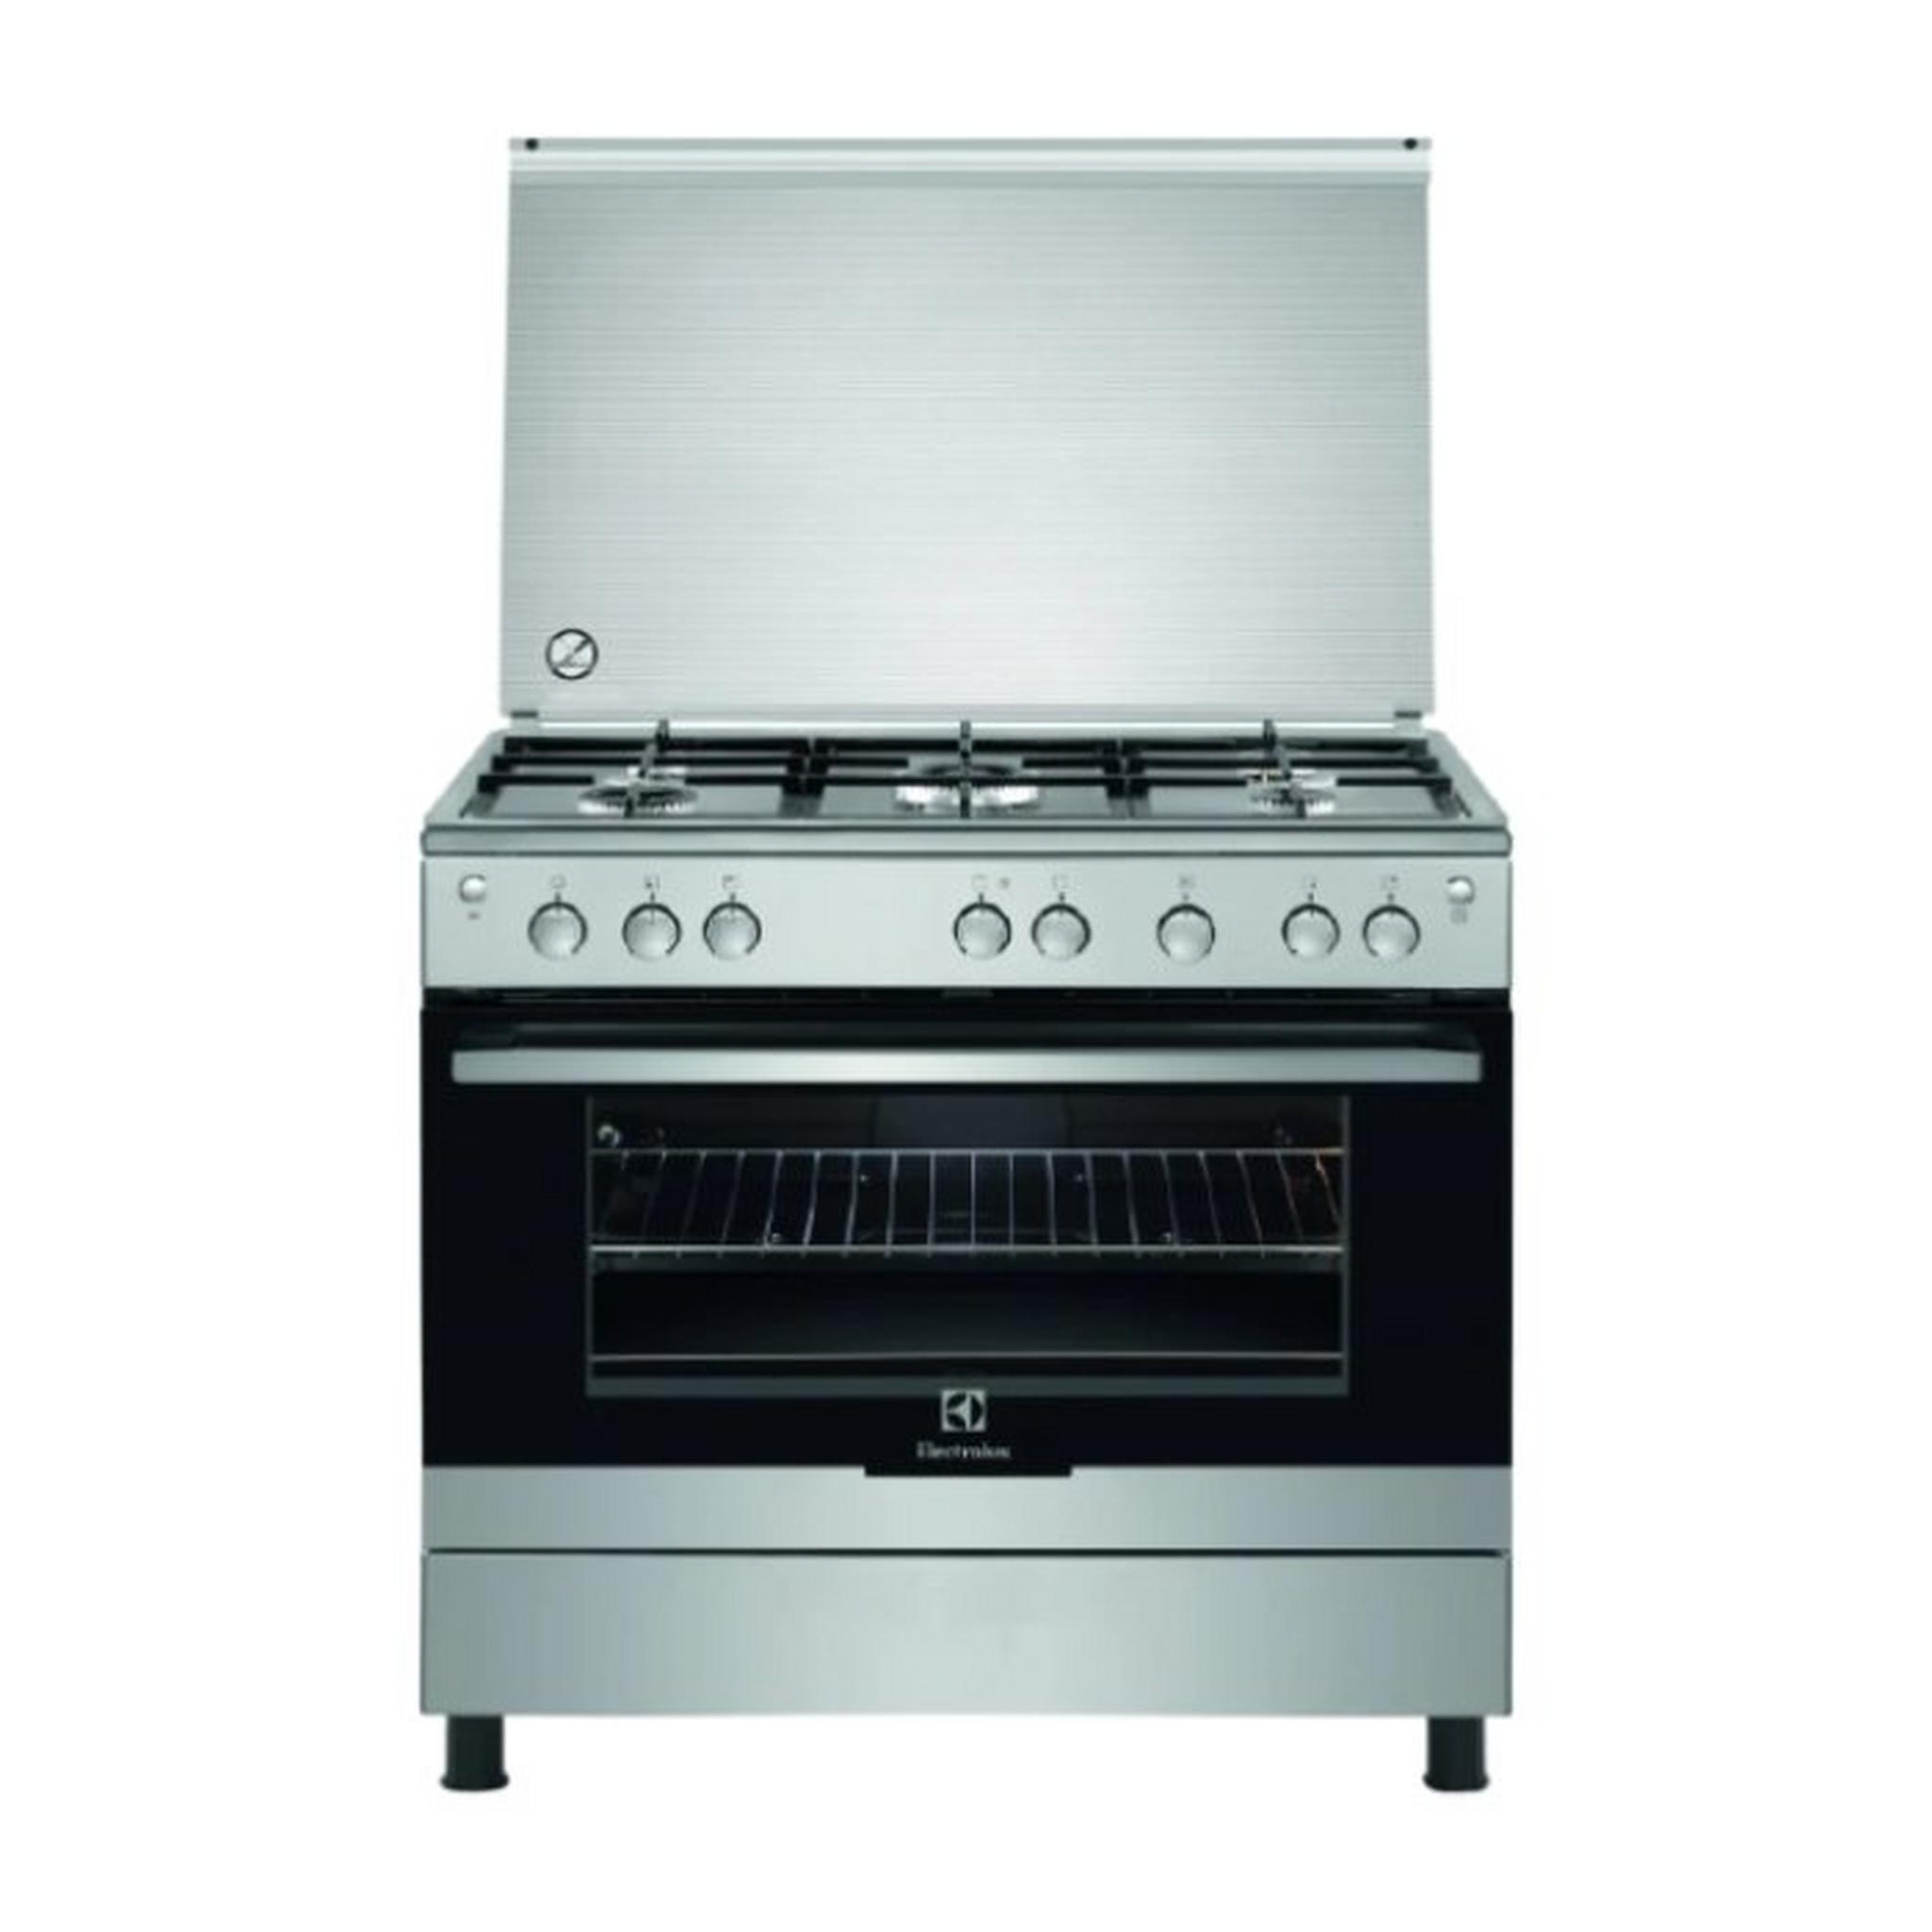 Electrolux 5 Burner Gas Cooker - 90x60 CM - Stainless Steel (EKG9000A4X)